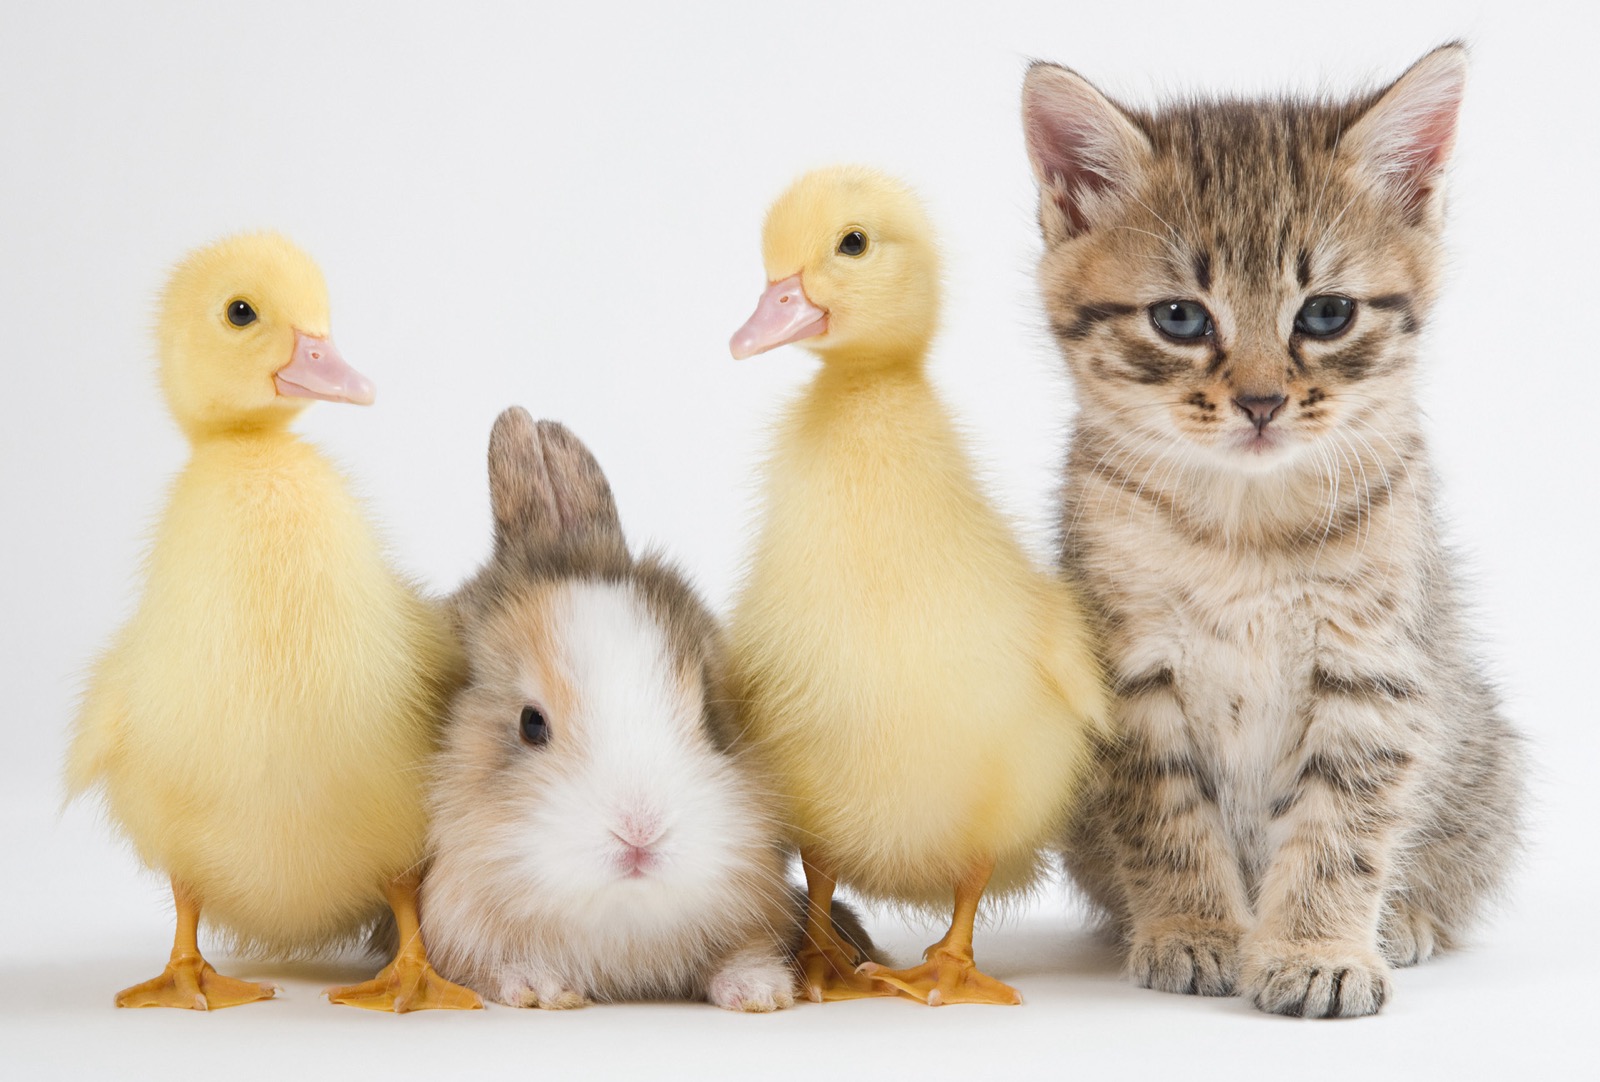 Quiz Questions With Answers Beginning With D Kitten, ducklings, and rabbit, baby animals